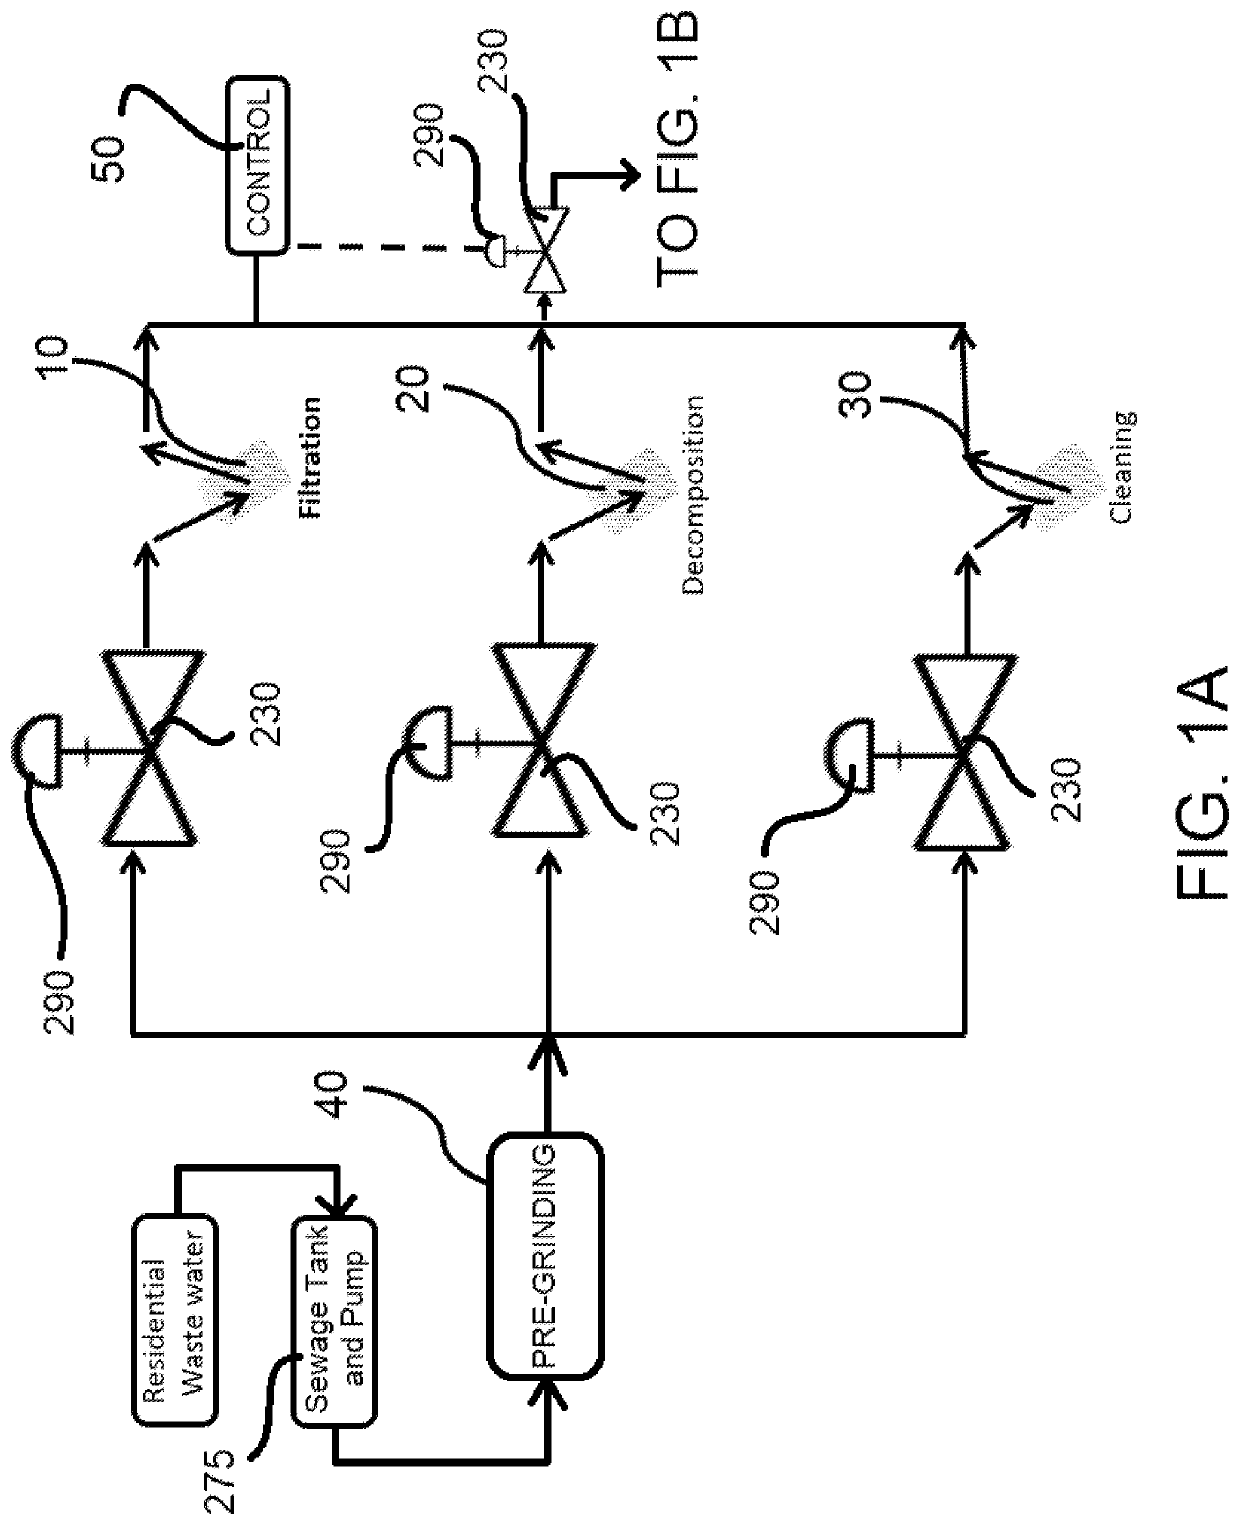 Continuous, approximately real-time residential wastewater treatment system and apparatus